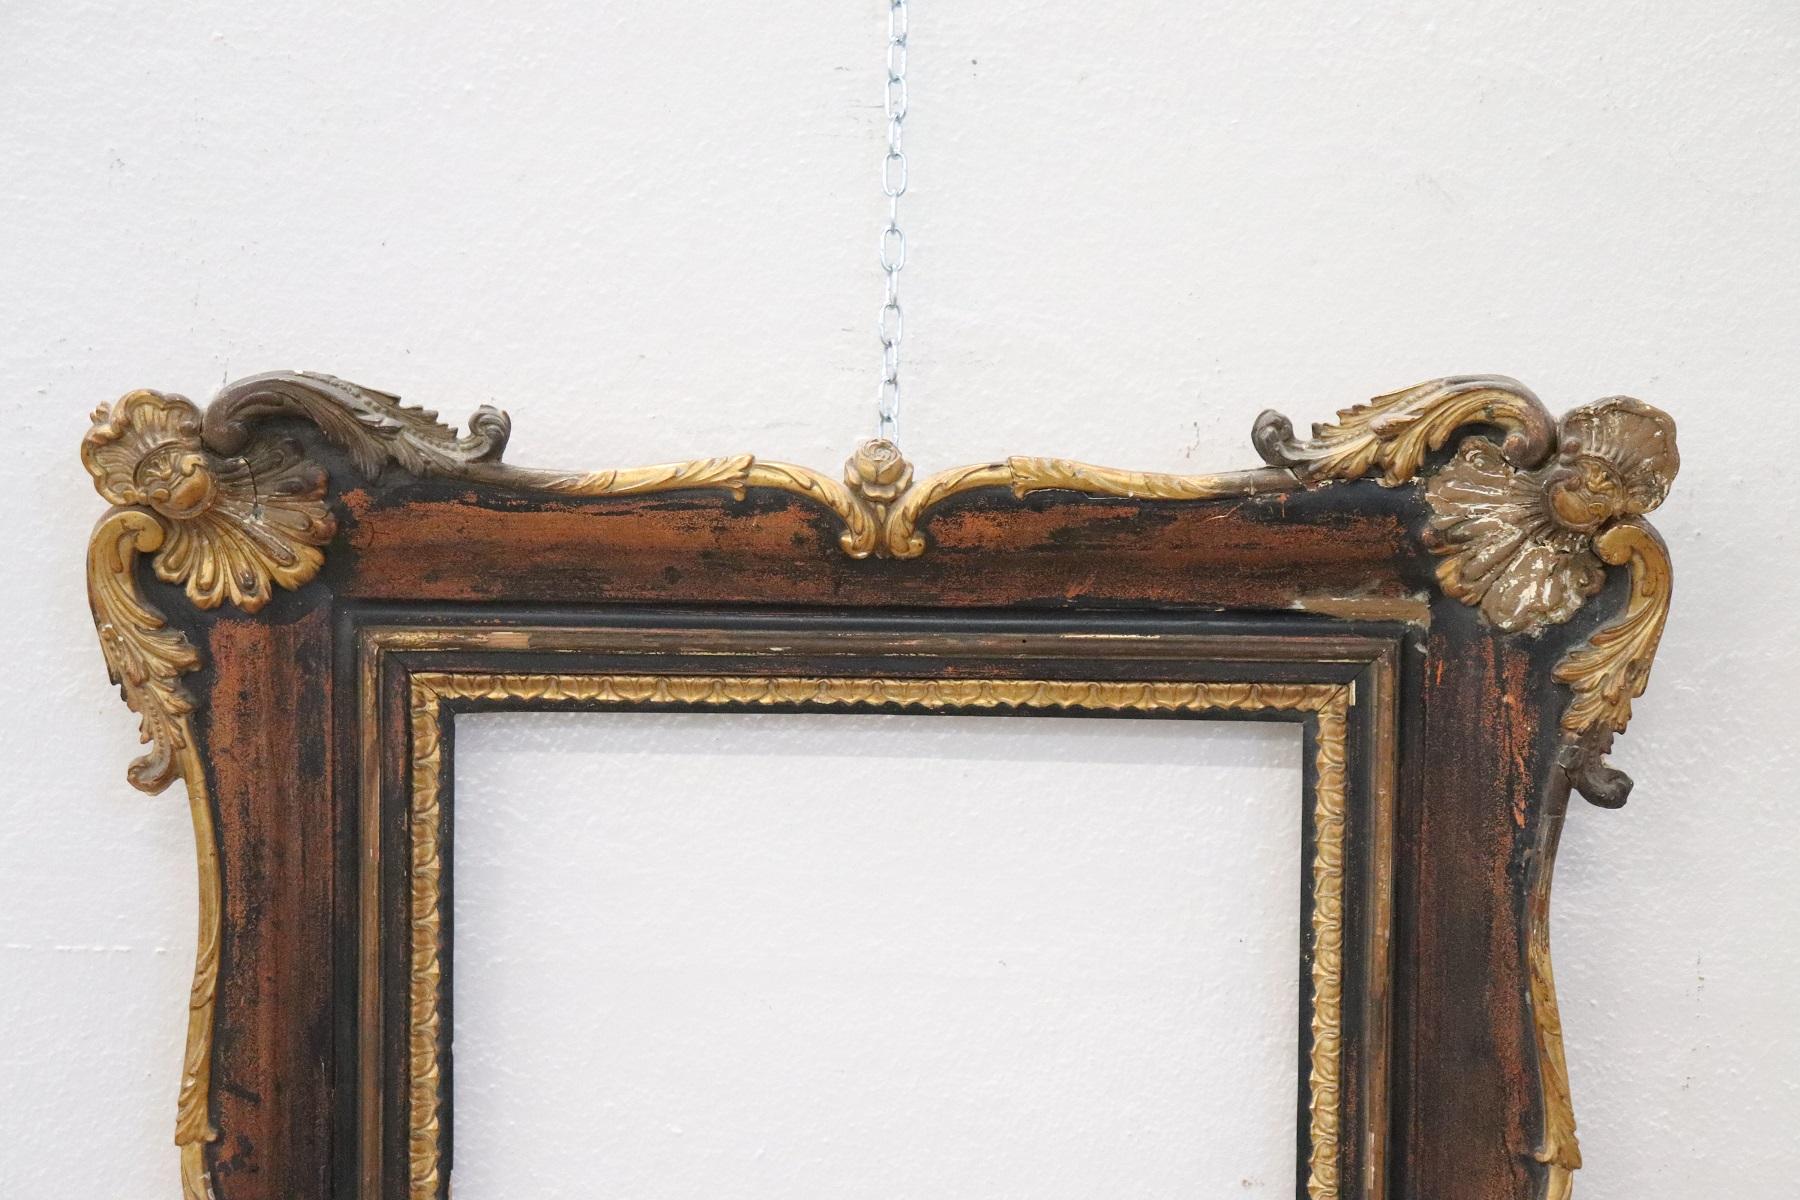 External measures cm 74 x cm 63
inside cm 46 x cm 36
Refined wood frame about 1910s. Made of solid wood with decoration in golden plaster. Conditions used look good all photos. You can use this frame according to your imagination with a mirror, a